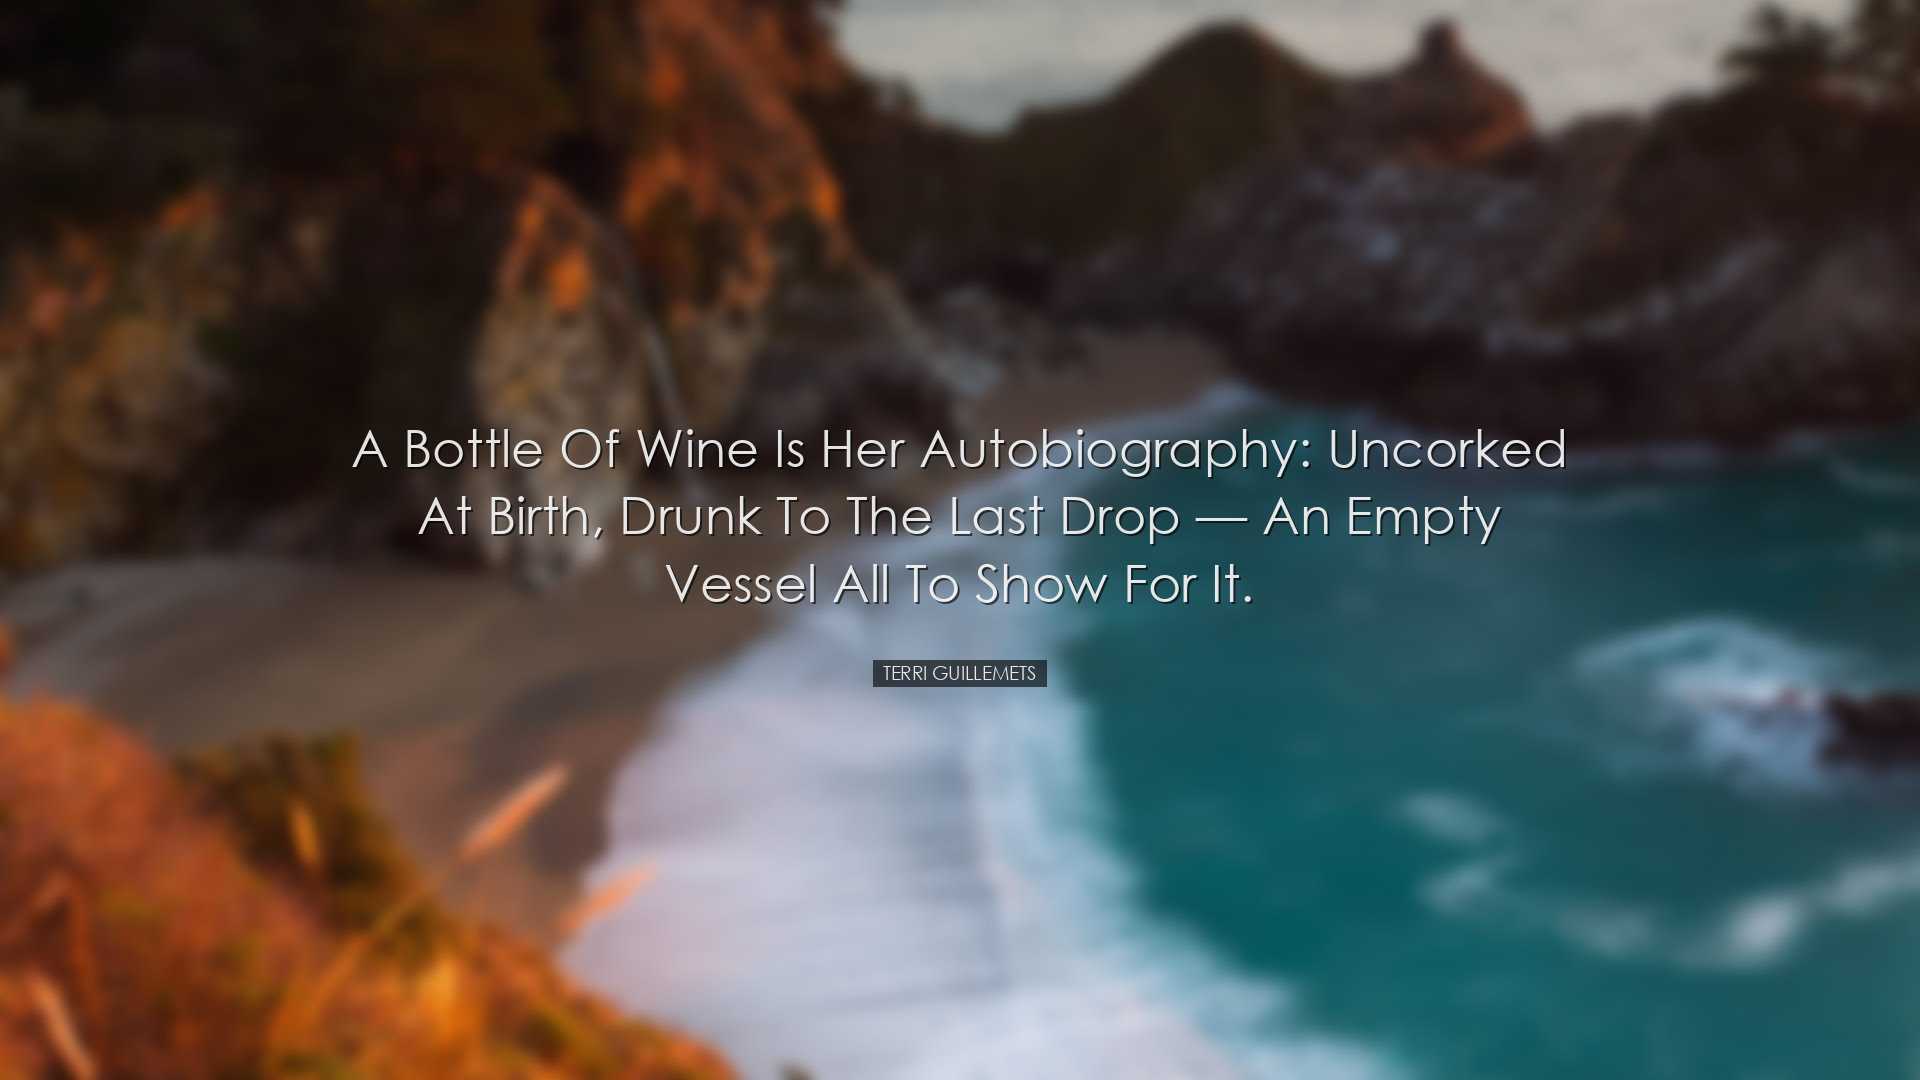 A bottle of wine is her autobiography: uncorked at birth, drunk to